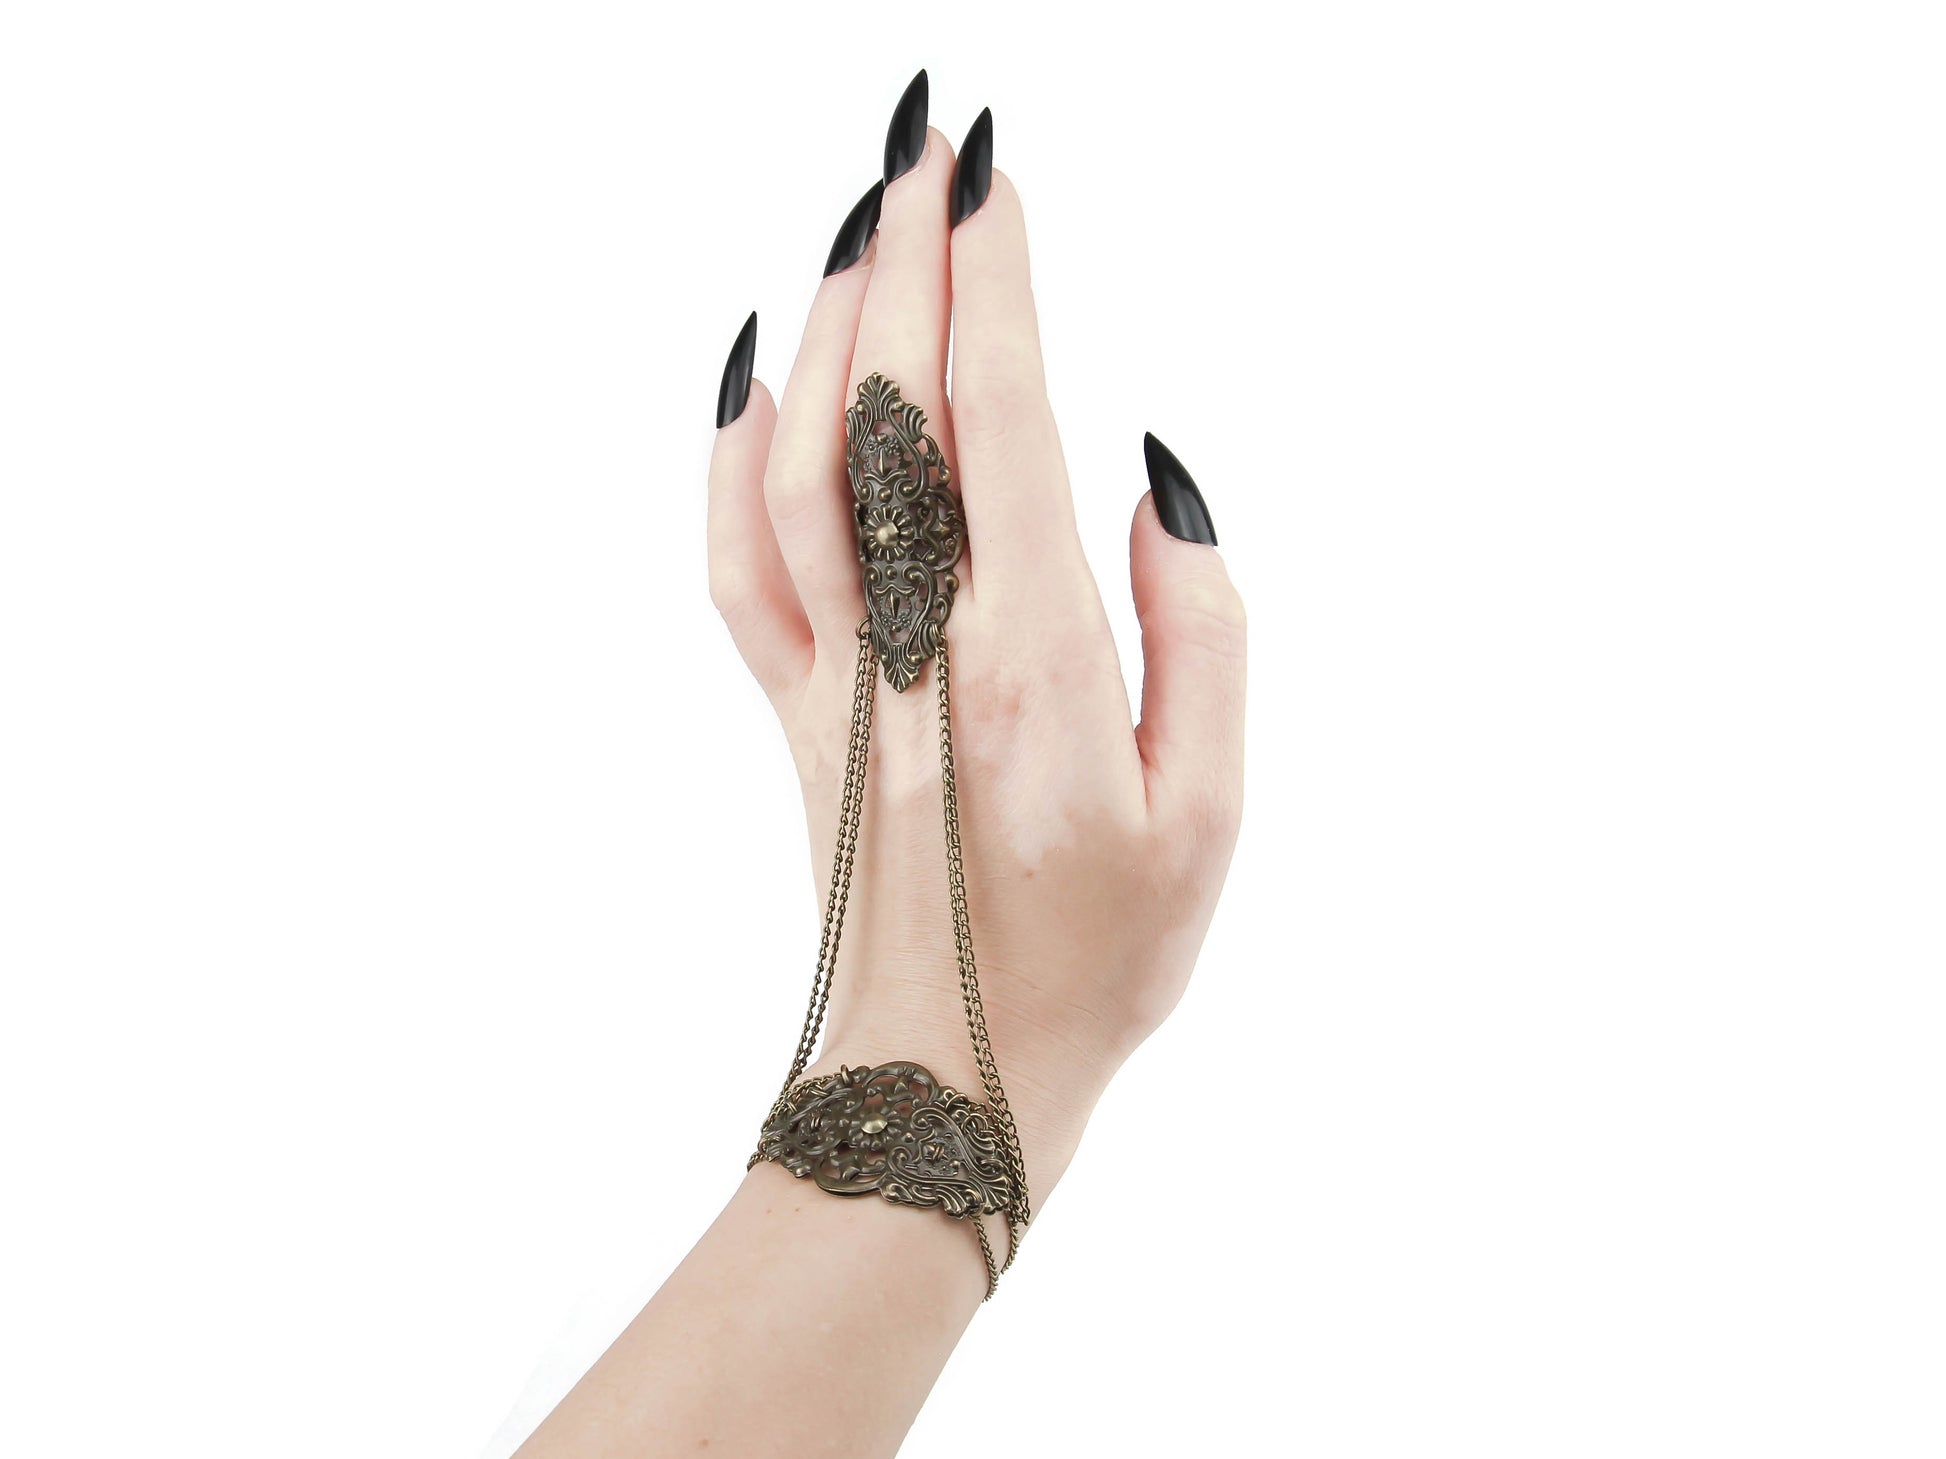 A stunning bronze hand chain adornment with a gothic-inspired design is shown off on a hand adorned with sharp, black manicured nails, capturing the essence of goth fashion. The piece boasts intricate filigree metalwork that adorns the back of the hand, while chains elegantly connect the bracelet portion to the middle finger ring. The background is a crisp white, emphasizing the refined and mysterious charm of this meticulously crafted creation.